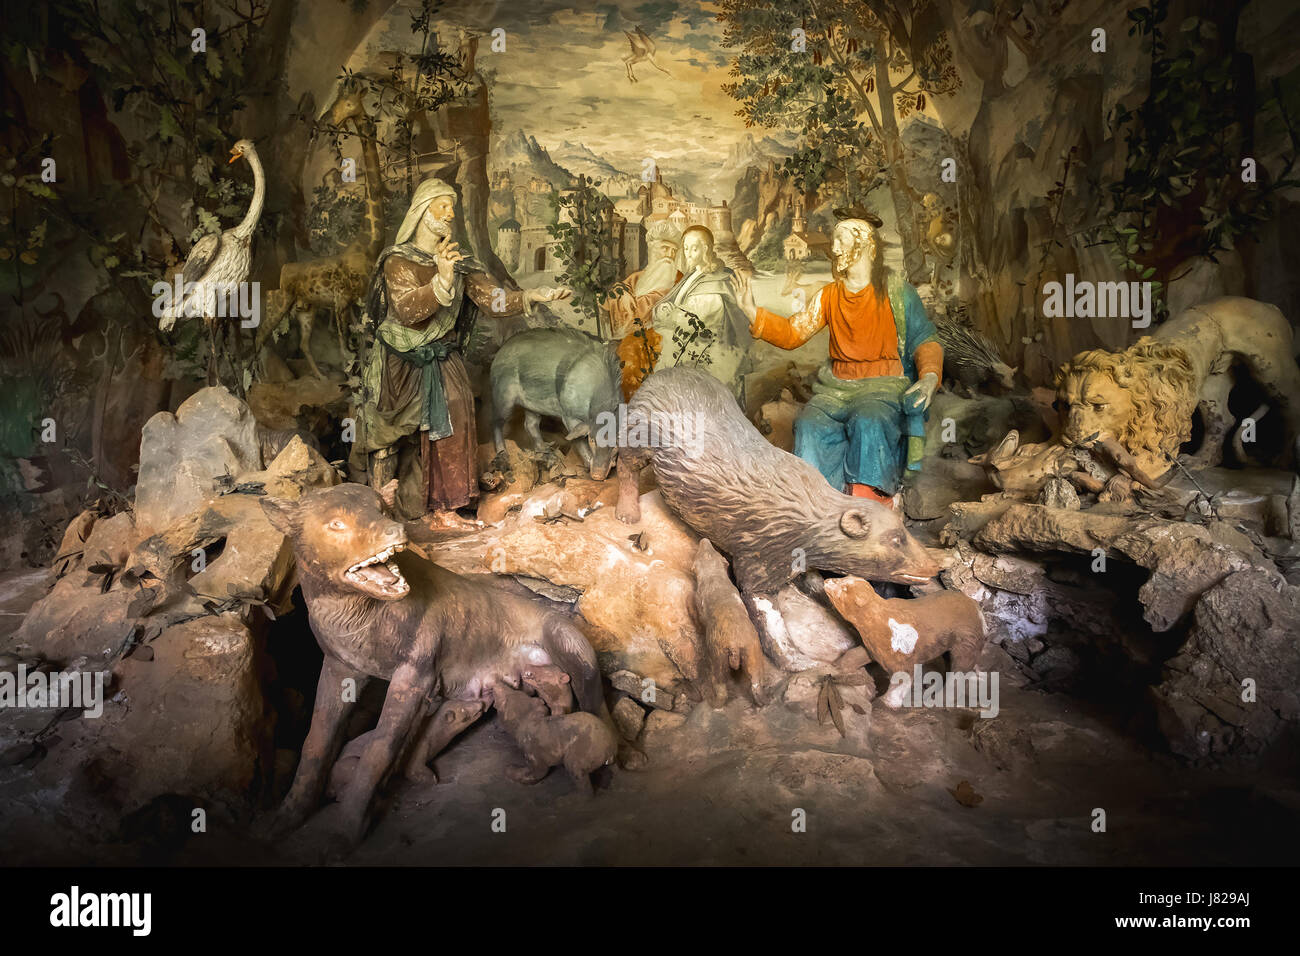 Sacro Monte di Varallo, Piedmont, Italy, May 23 2017 - a biblical scene representation of a terracotta Jesus Christ surrounded by fierce animals Stock Photo